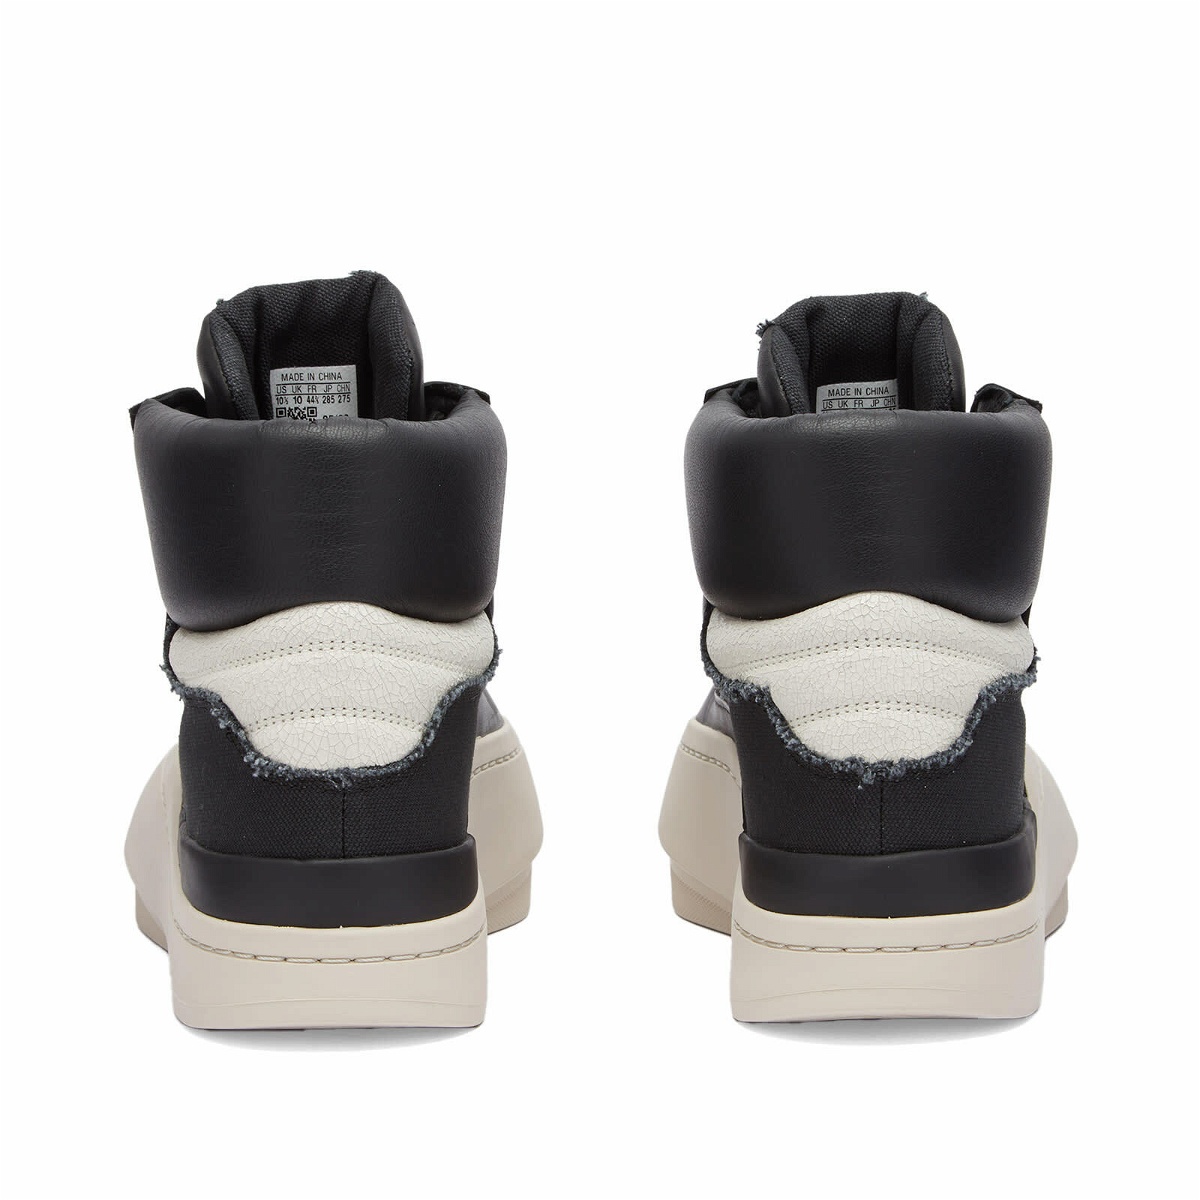 Y-3 Men's Lux Bball High Sneakers in Black/Clear Brown/Off White Y-3